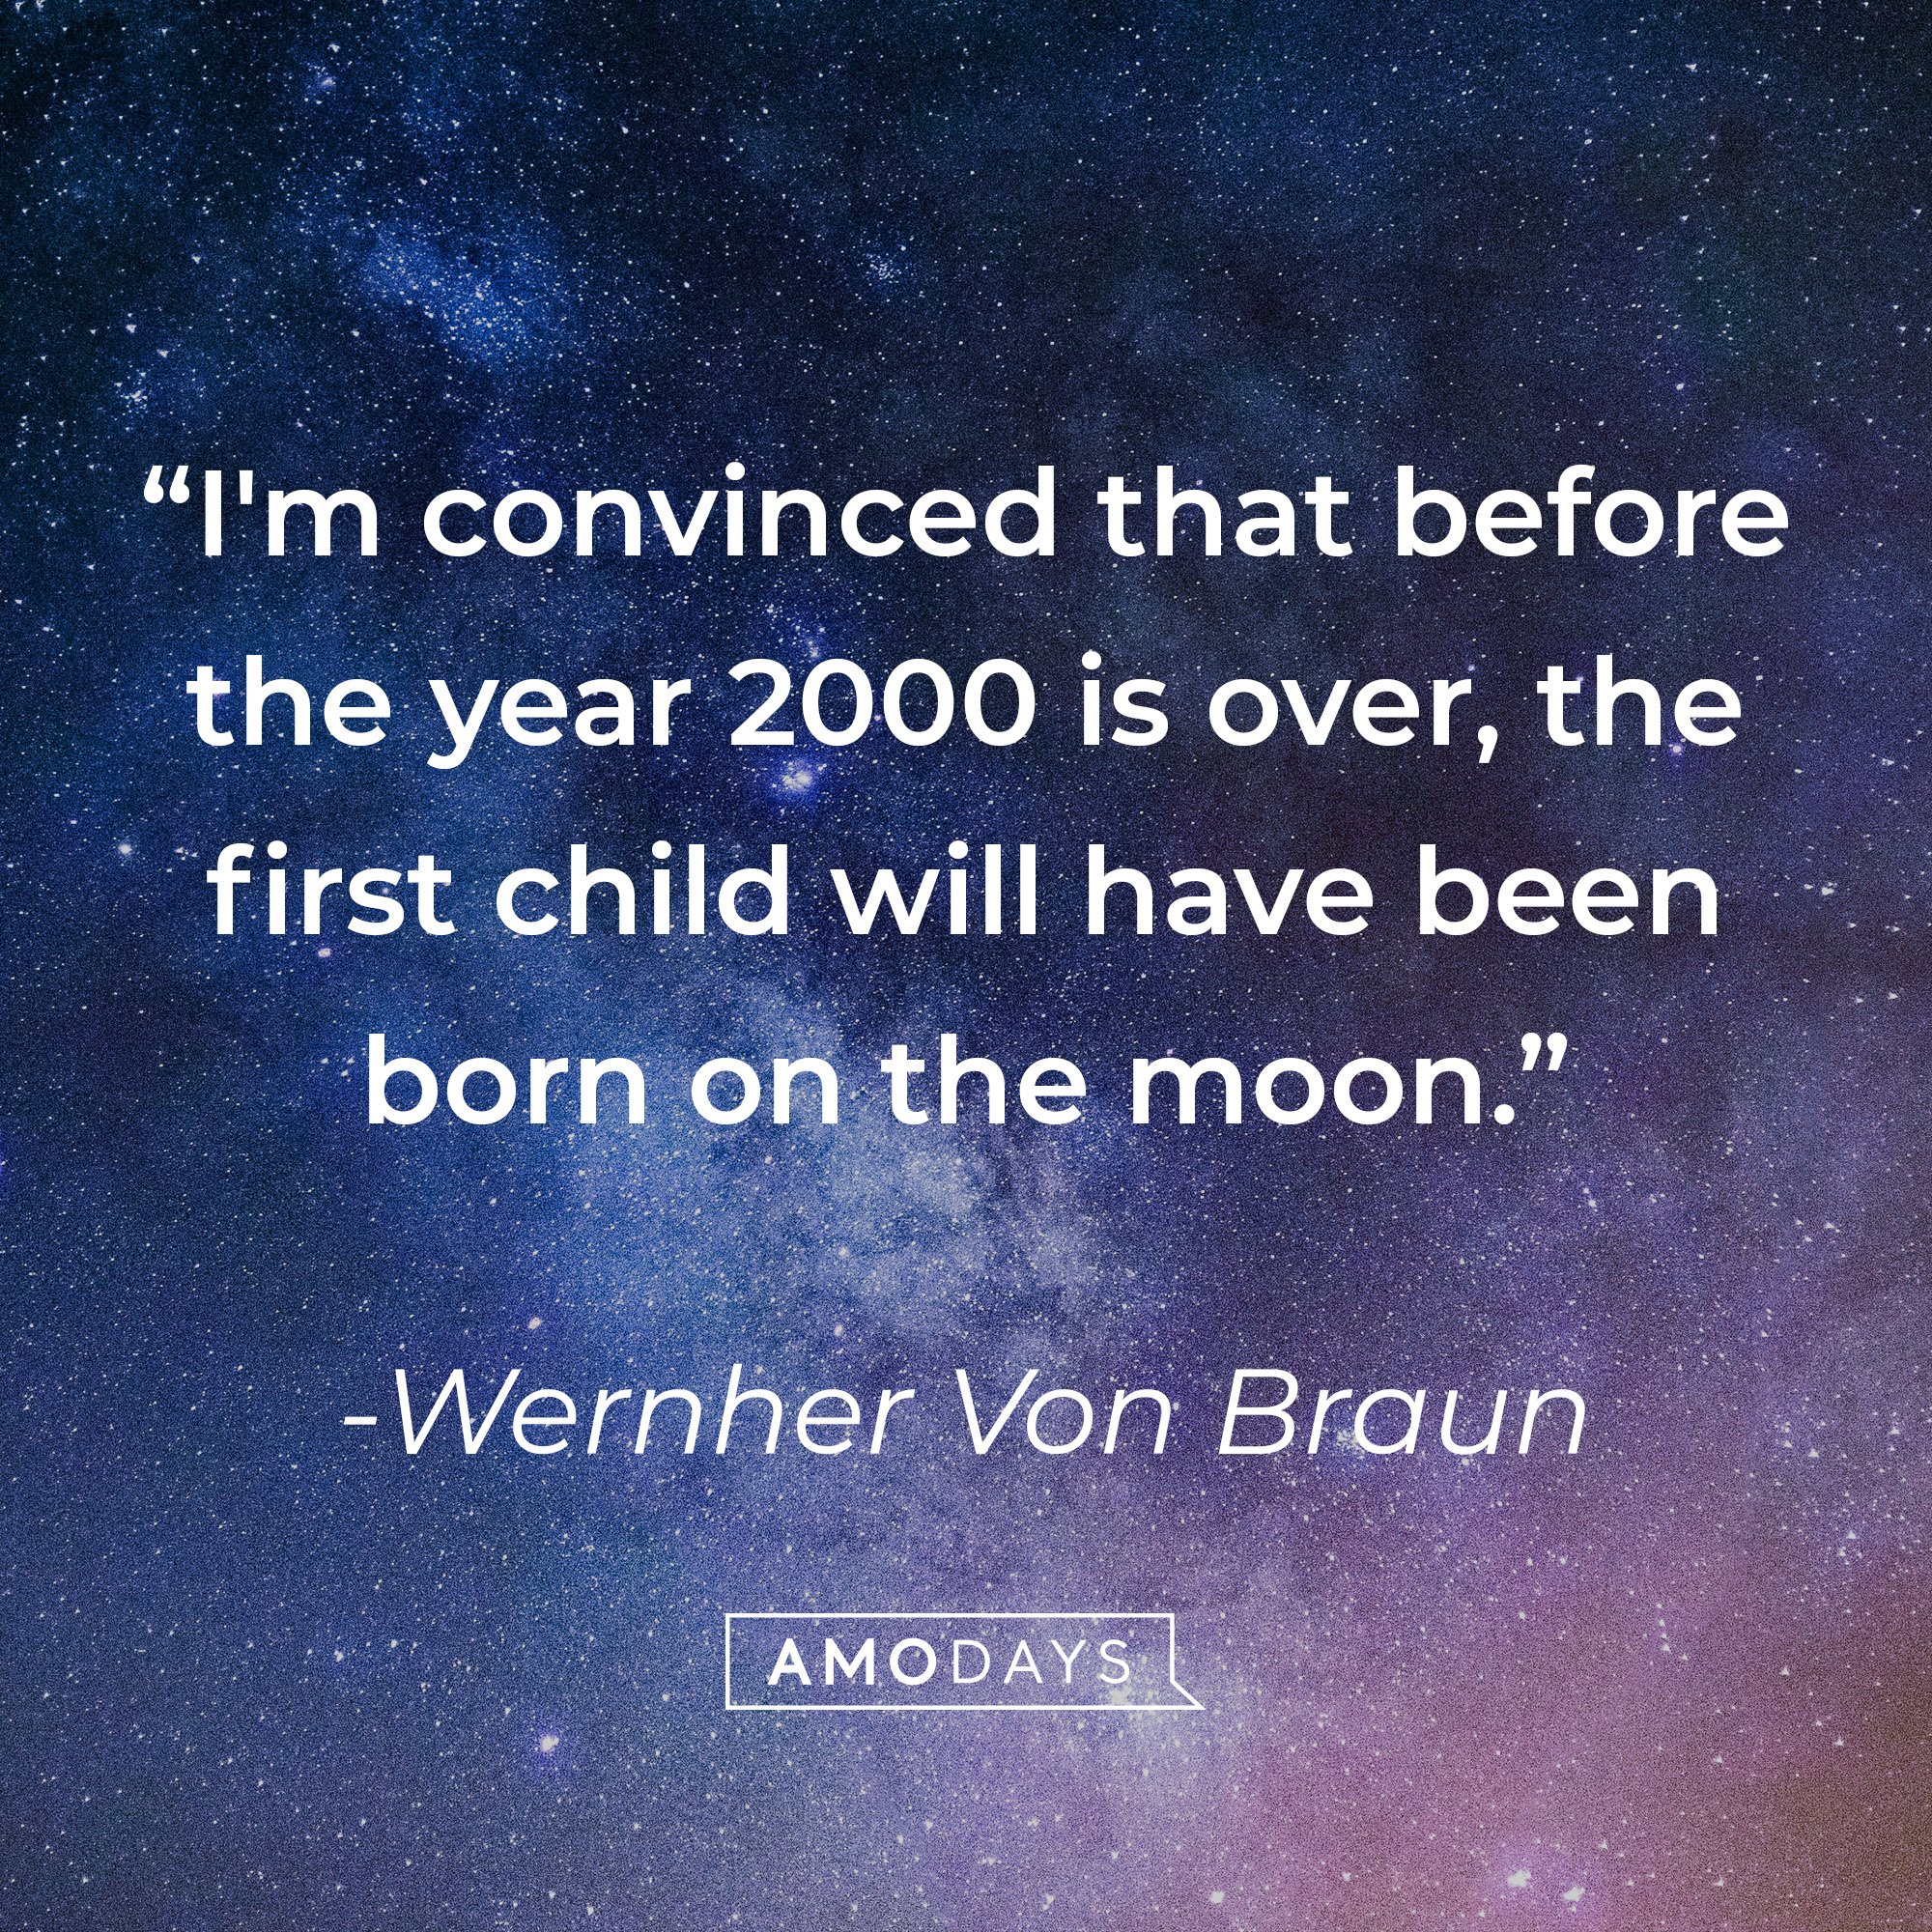 Wernher Von Braun’s quote: “I'm convinced that before the year 2000 is over, the first child will have been born on the moon.” | Image: AmoDays